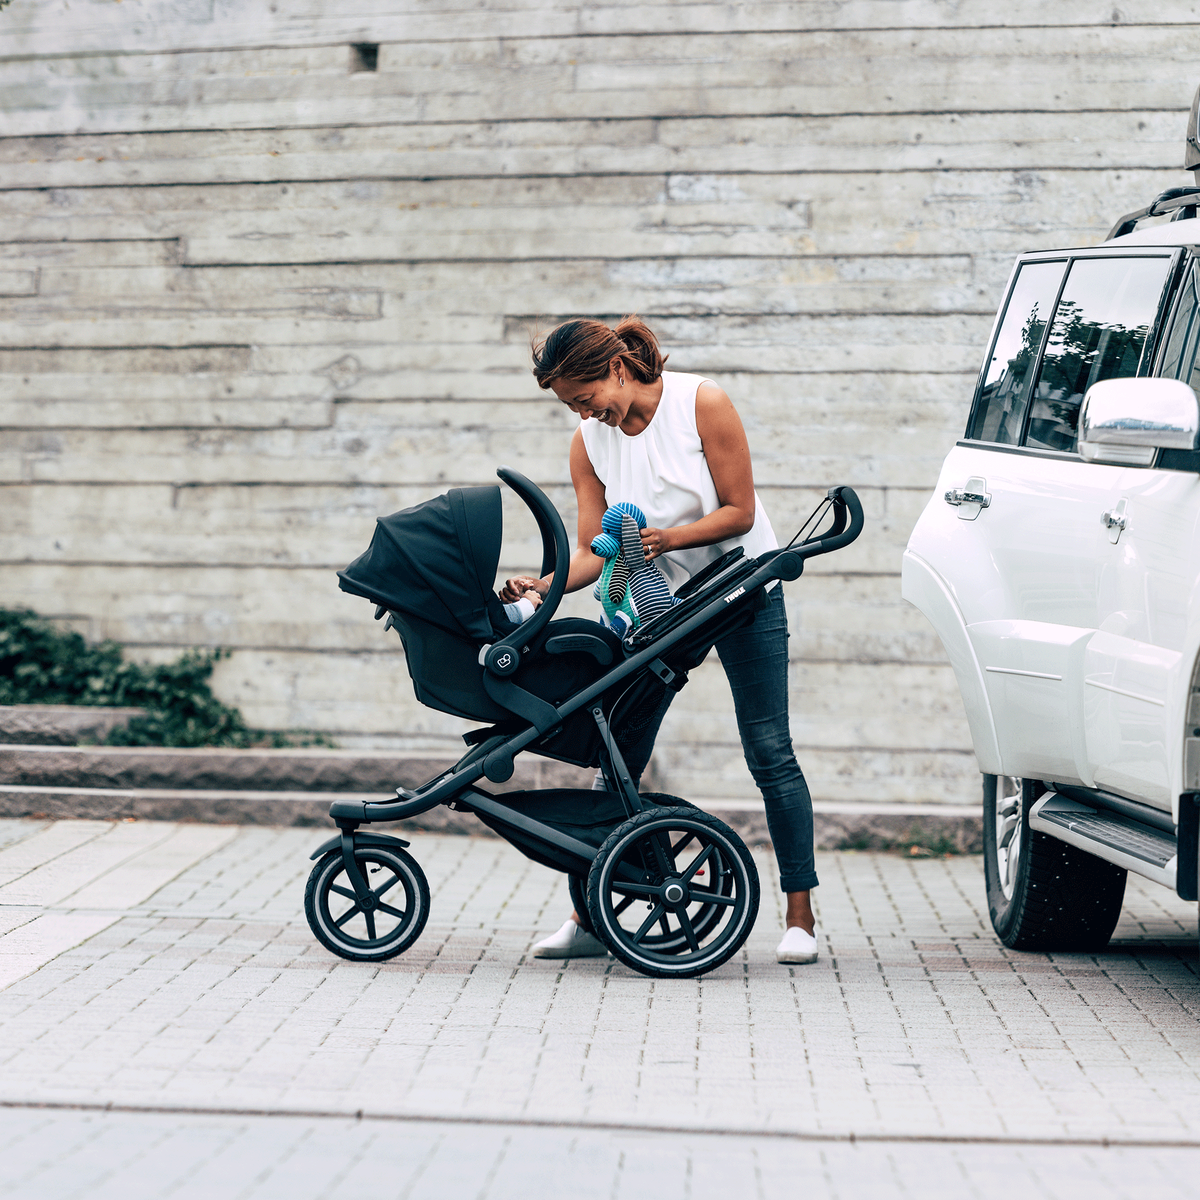 A woman tends to her baby in a car seat attached to the Thule Urban Glide 2 all-terrain stroller.